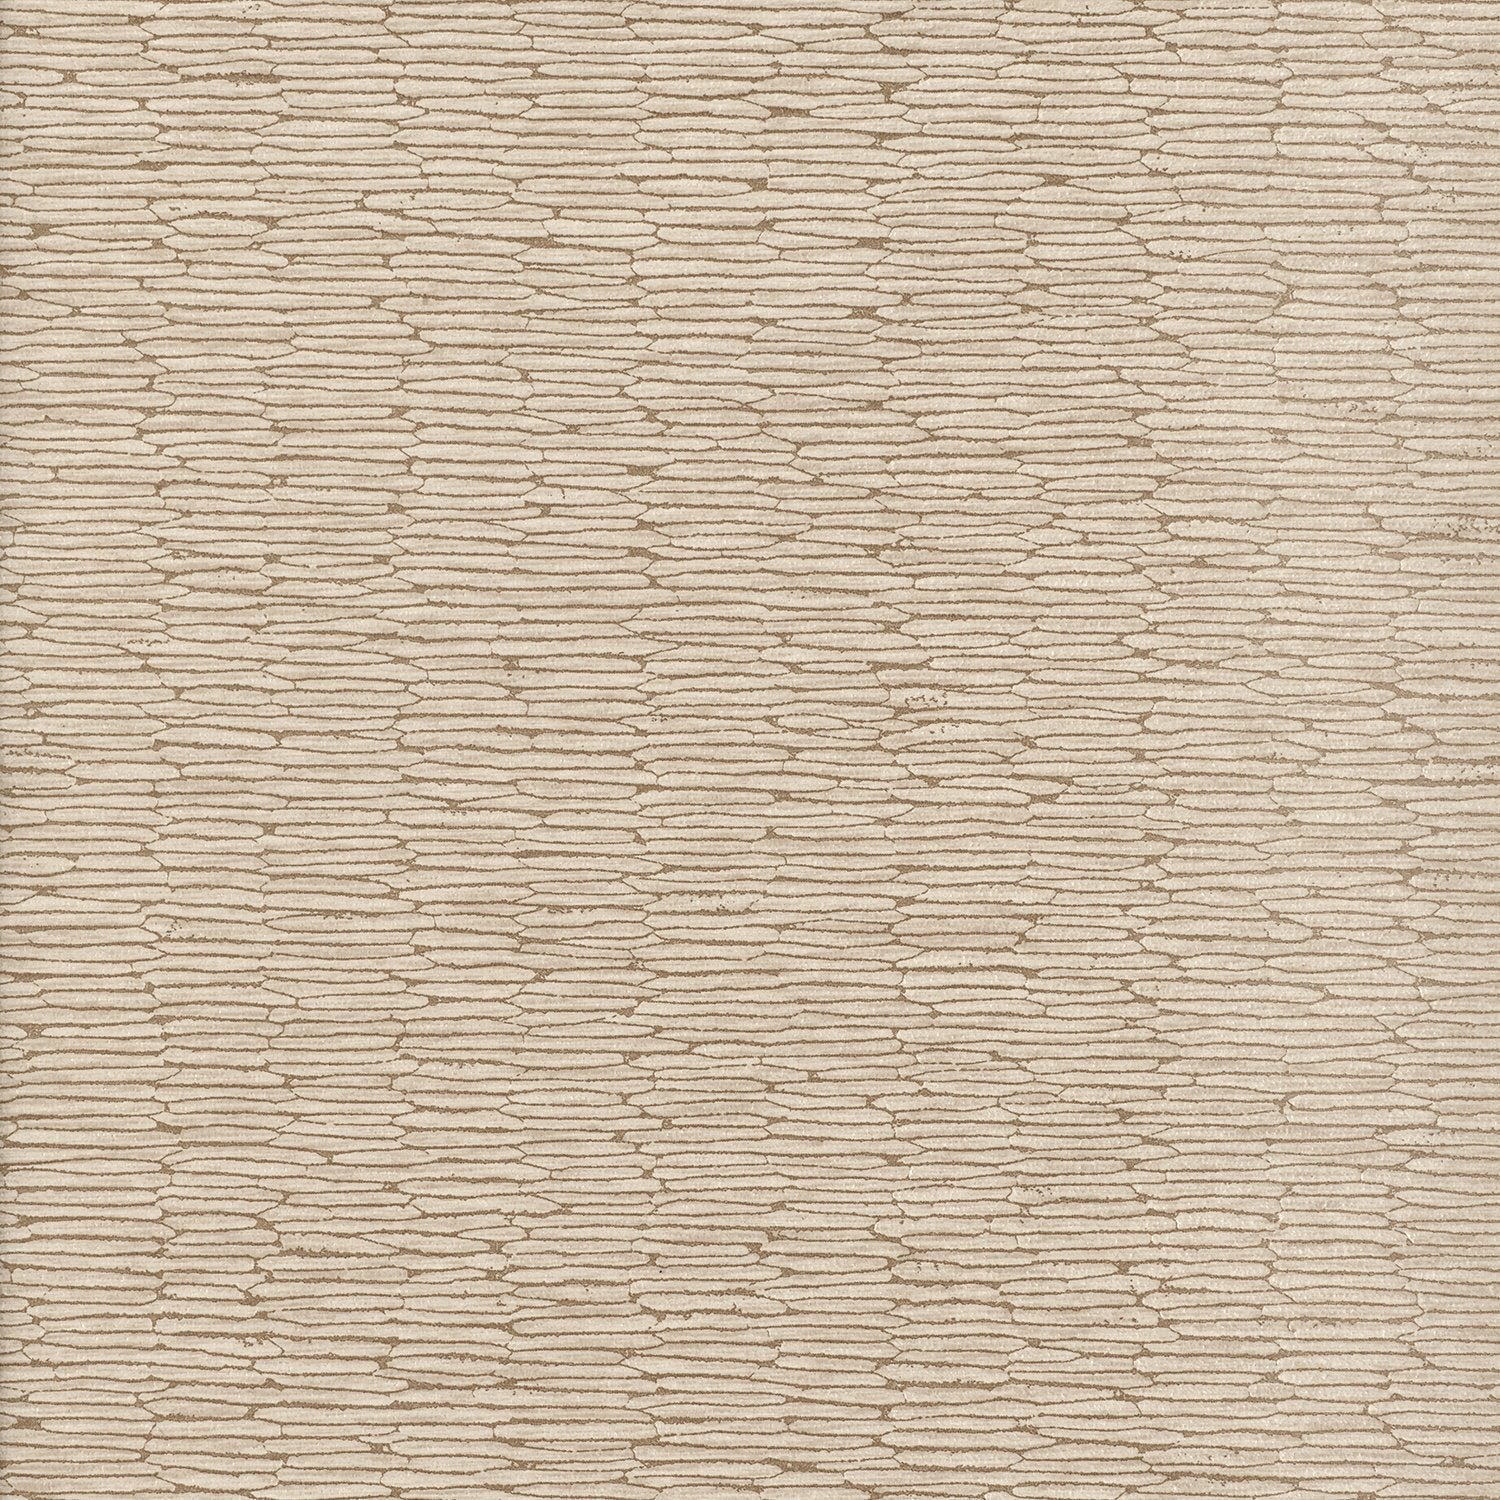 Chipper - Y46867 - Wallcovering - Vycon - Kube Contract